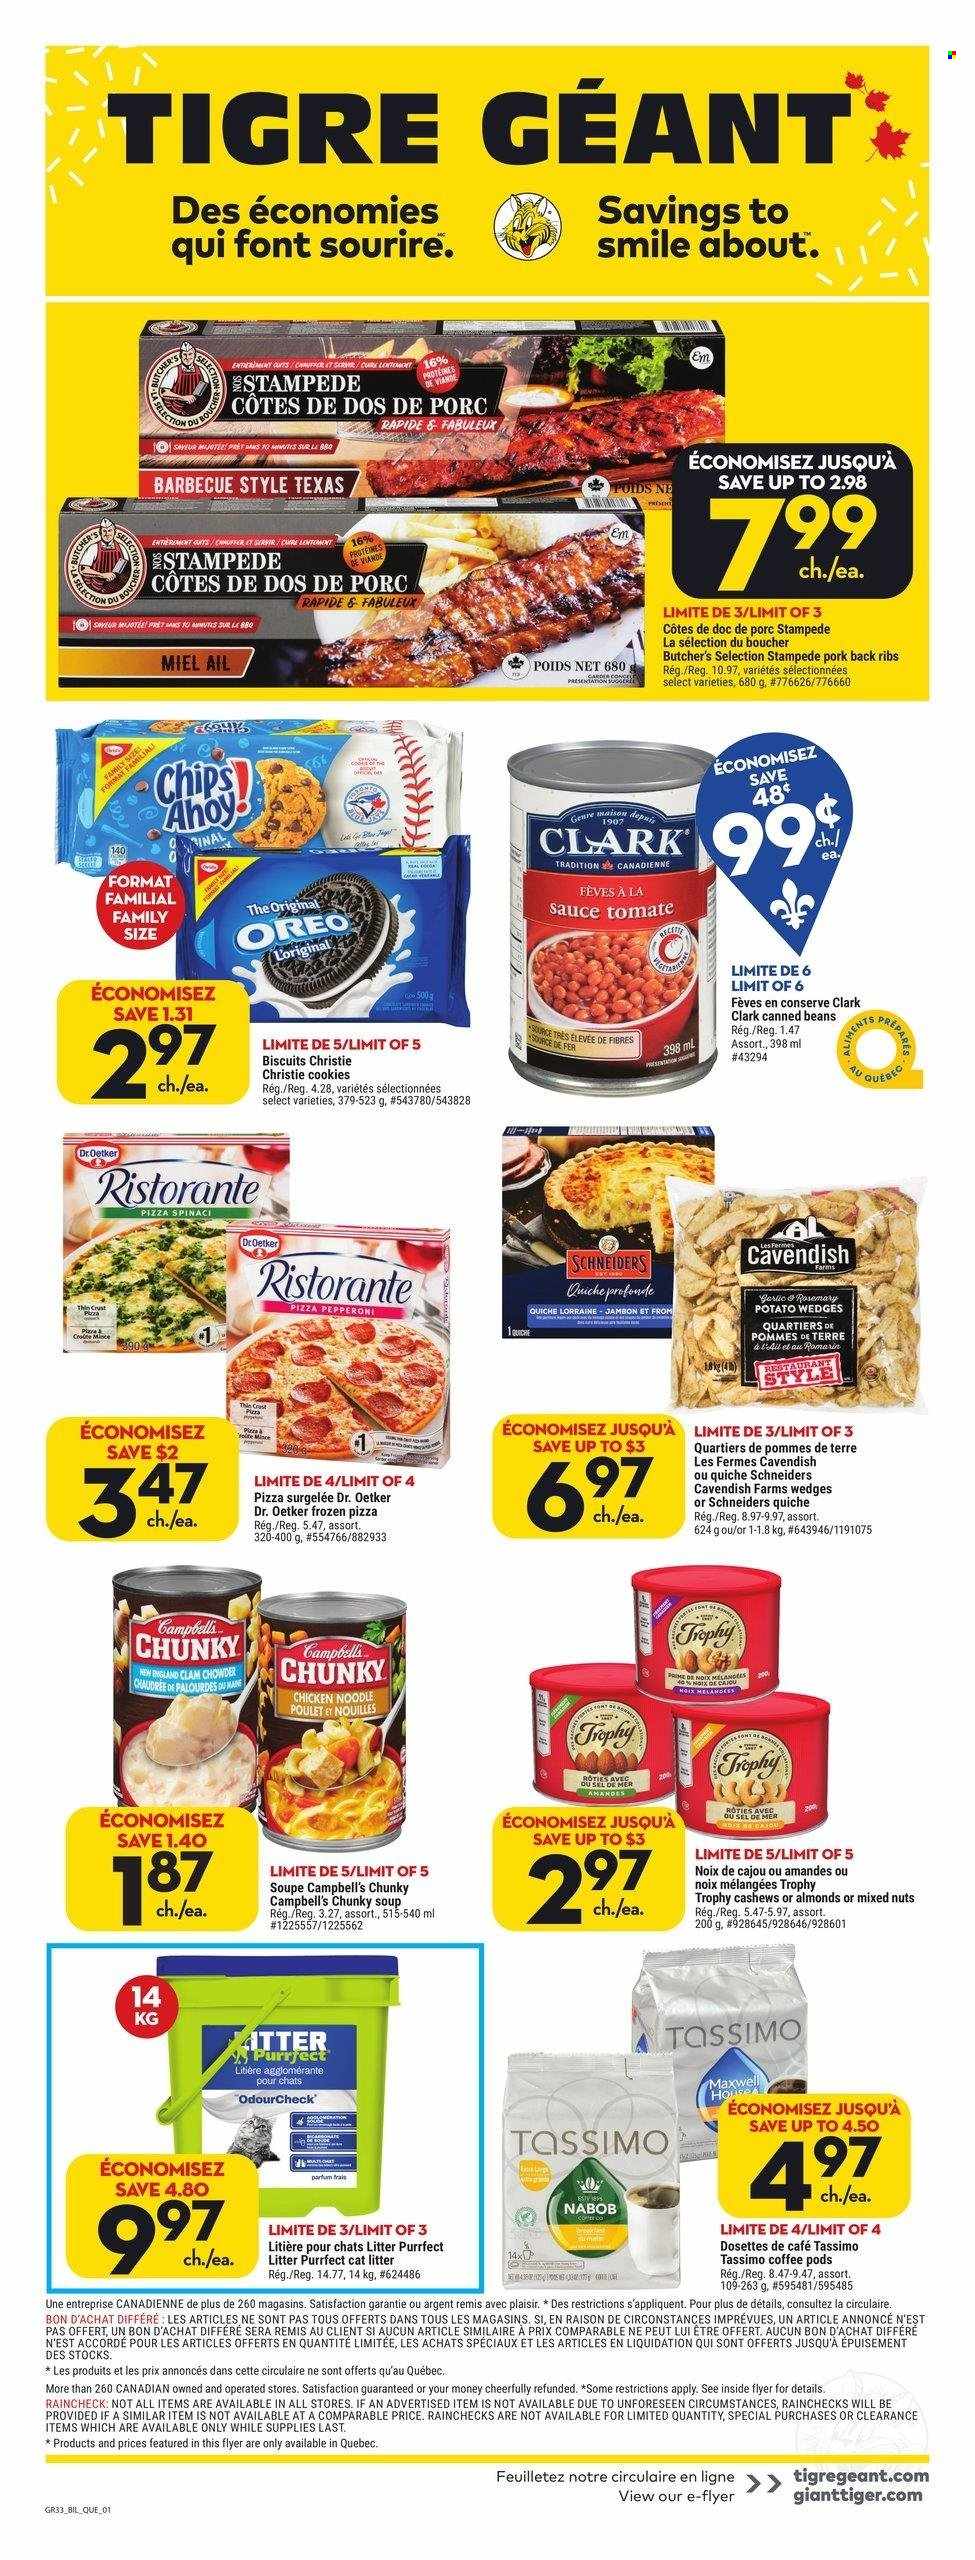 thumbnail - Giant Tiger Flyer - March 15, 2023 - March 21, 2023 - Sales products - Campbell's, pizza, soup, sauce, noodles, pepperoni, Dr. Oetker, potato wedges, quiche, cookies, biscuit, clam chowder, almonds, cashews, mixed nuts, coffee, coffee pods, ribs, pork meat, pork ribs, pork back ribs, eau de parfum, cat litter, Vans, Oreo. Page 1.